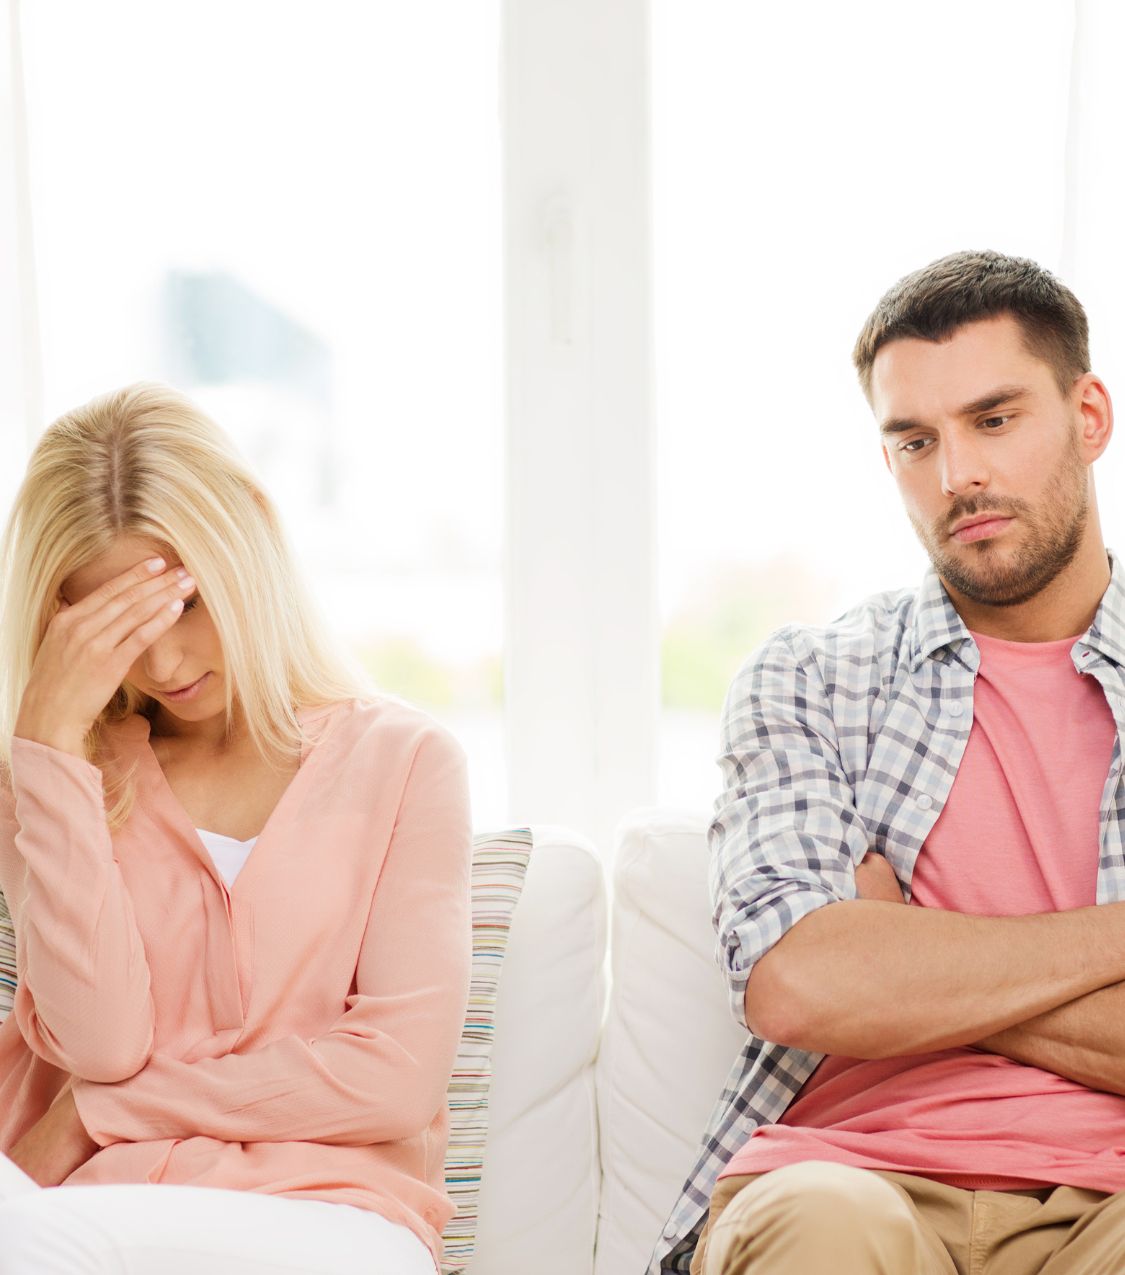 A woman sits next to a man, her hand on her forehead, symbolizing lost truth & honesty after the affair. Relationship Experts can assist. Schedule a consultation today. Serving couples globally, including California, North Carolina, Florida, Colorado, New York, Ohio in the USA, Canada, and the United Kingdom.